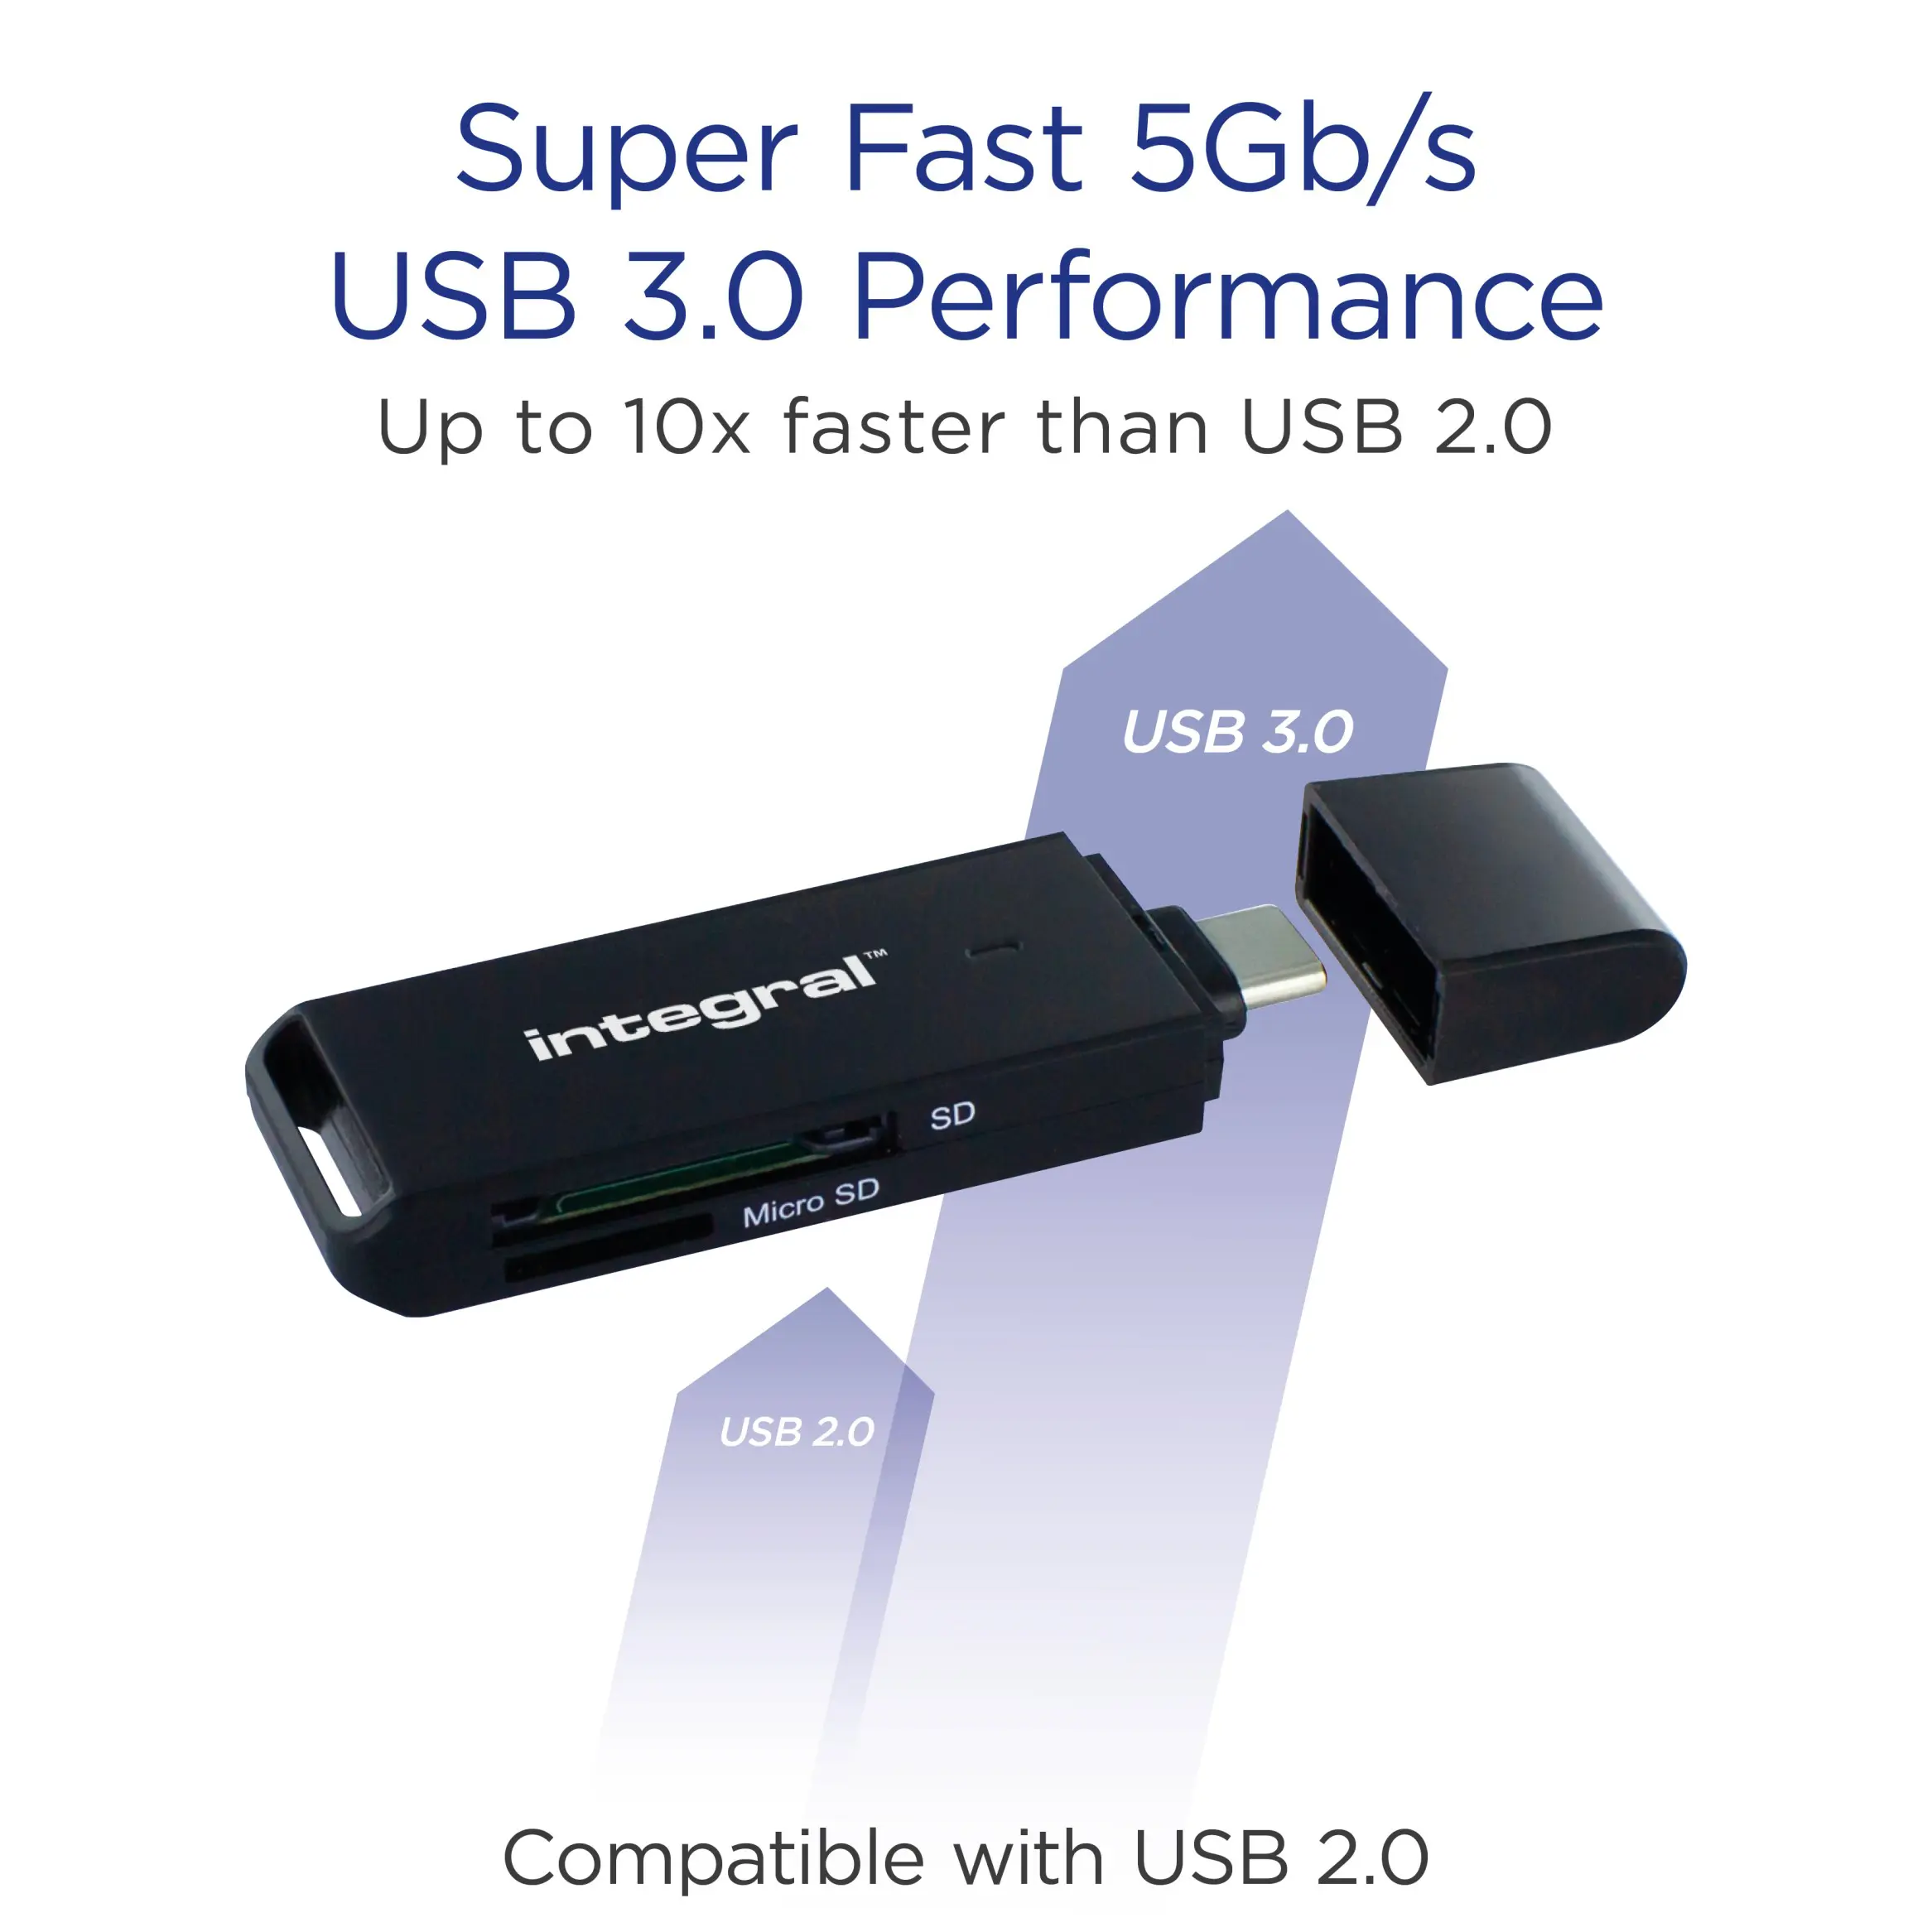 Super Fast 5GB/s USB 3 Dual Slot Micro SD and SD Memory Card Reader